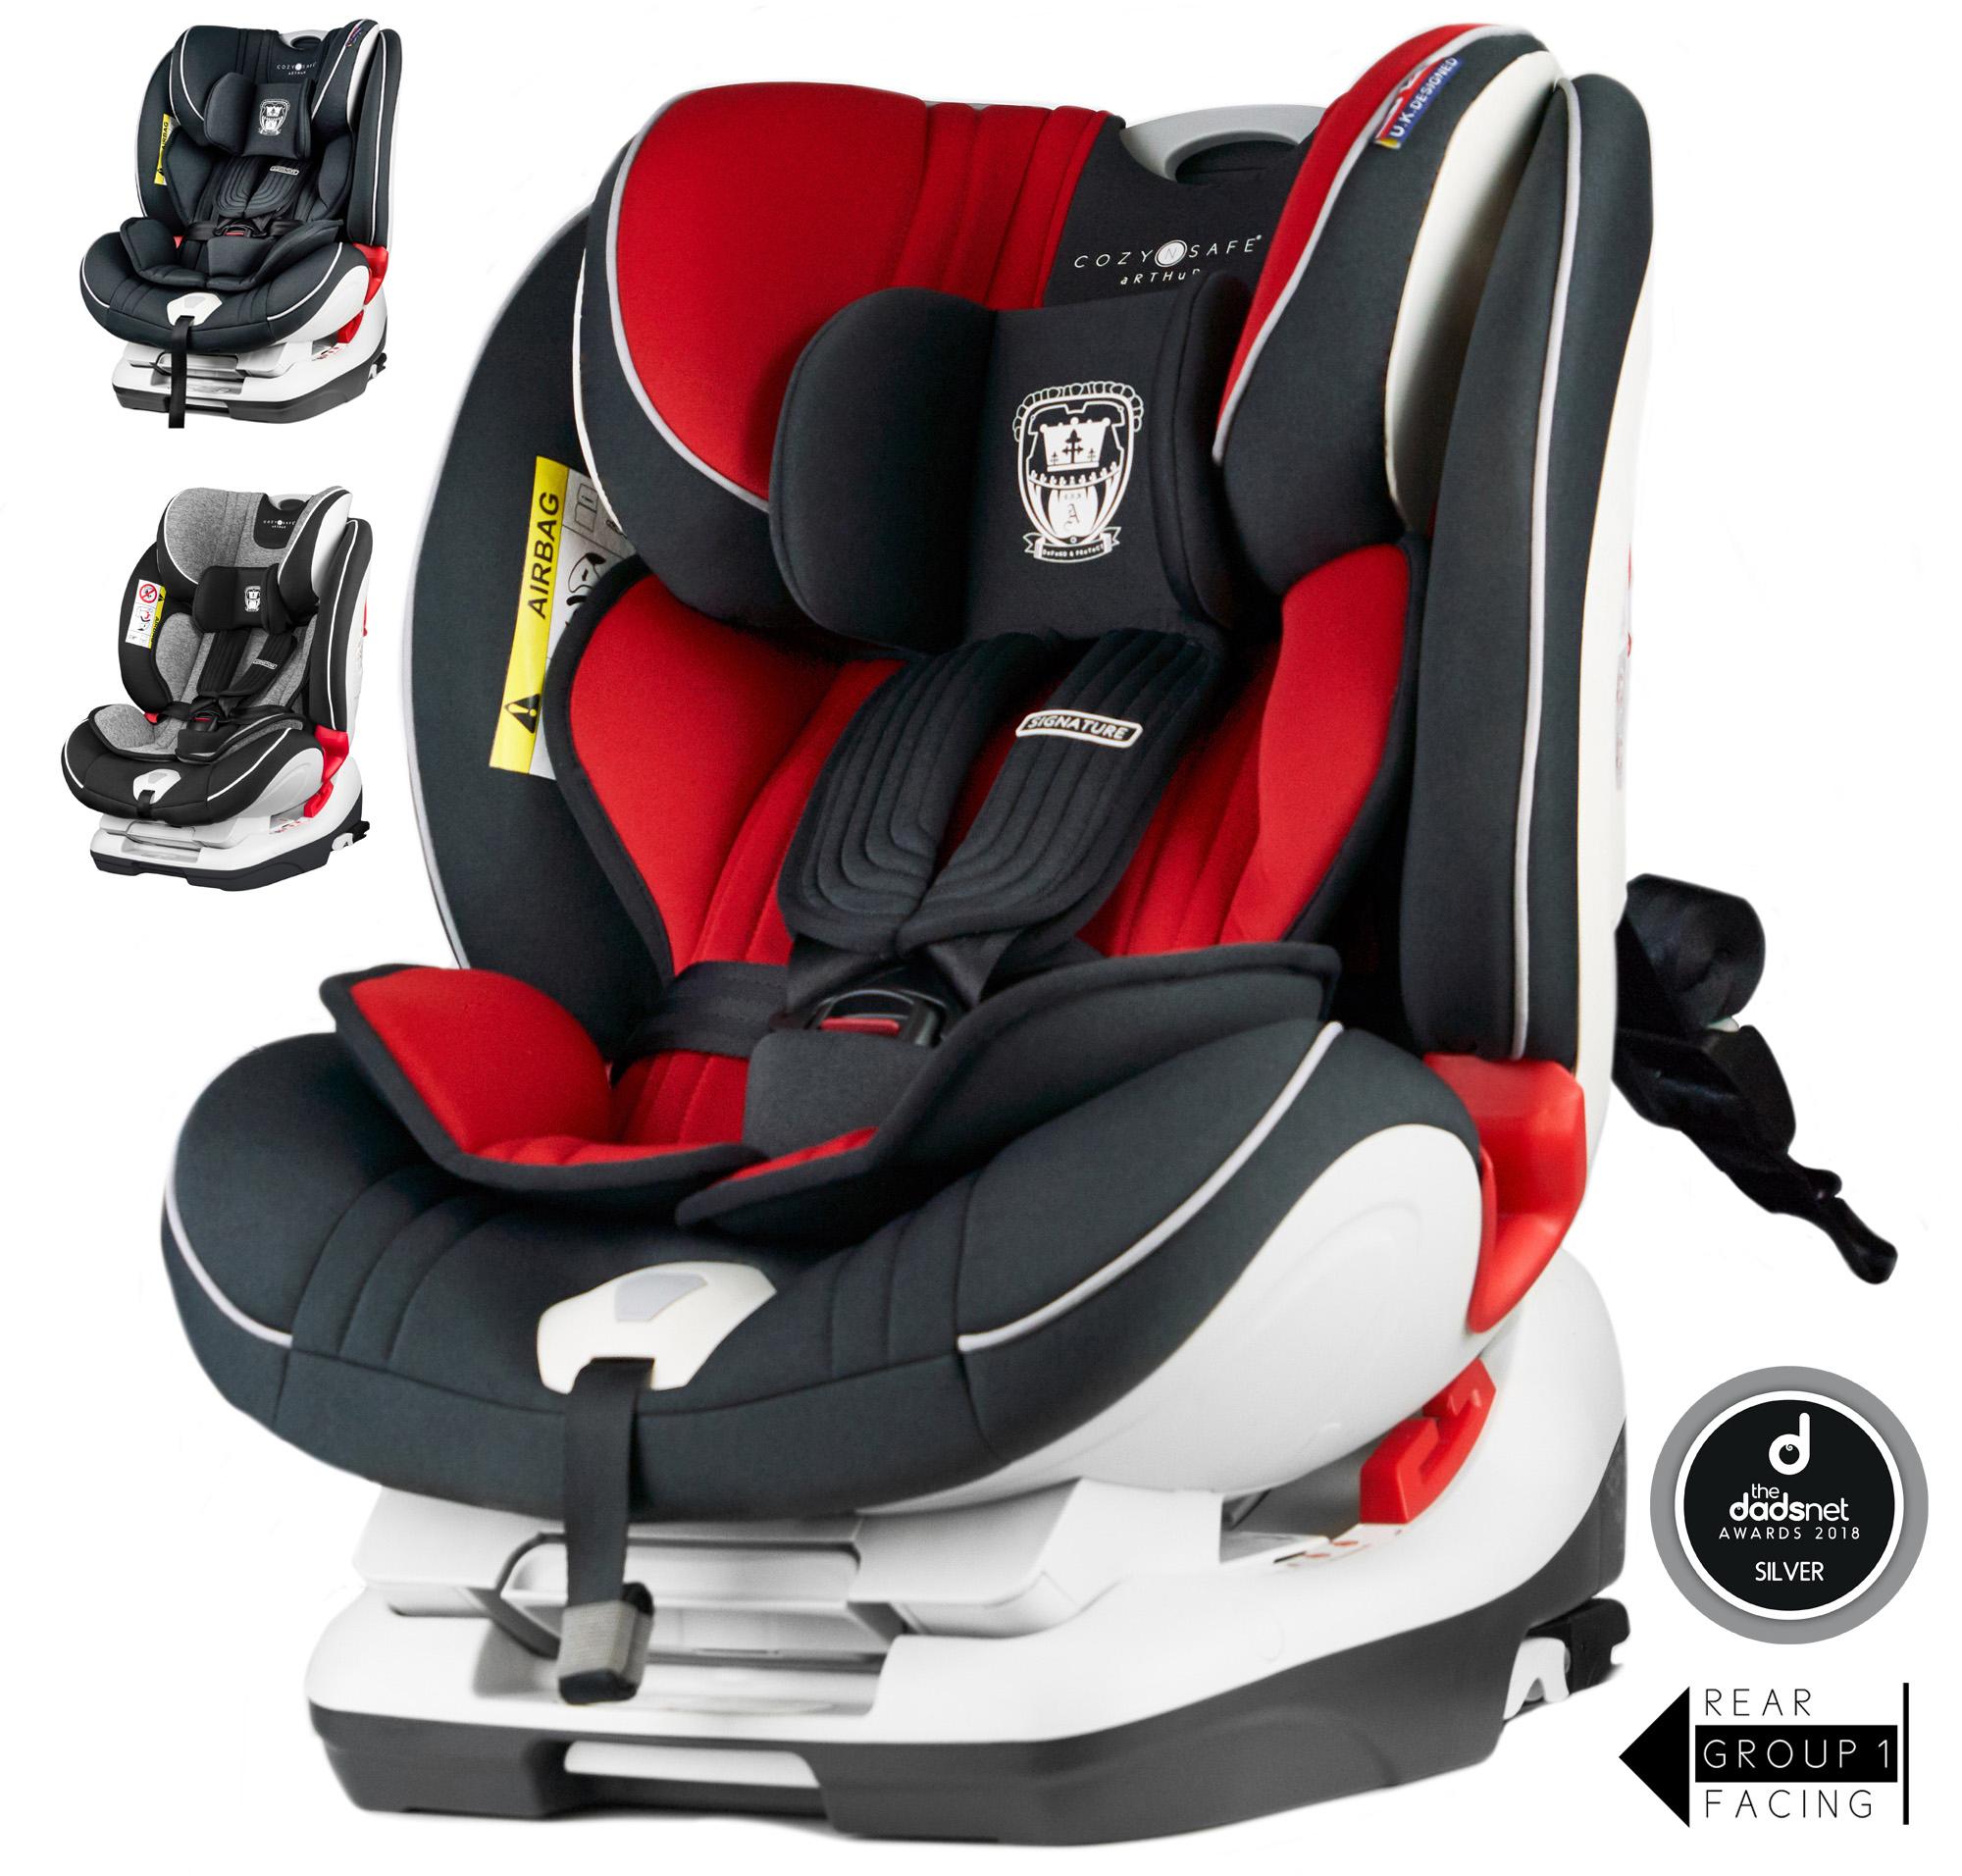 Cozynsafe Arthur Group Isofix 0+1/2/3 Child Car Seat - Red